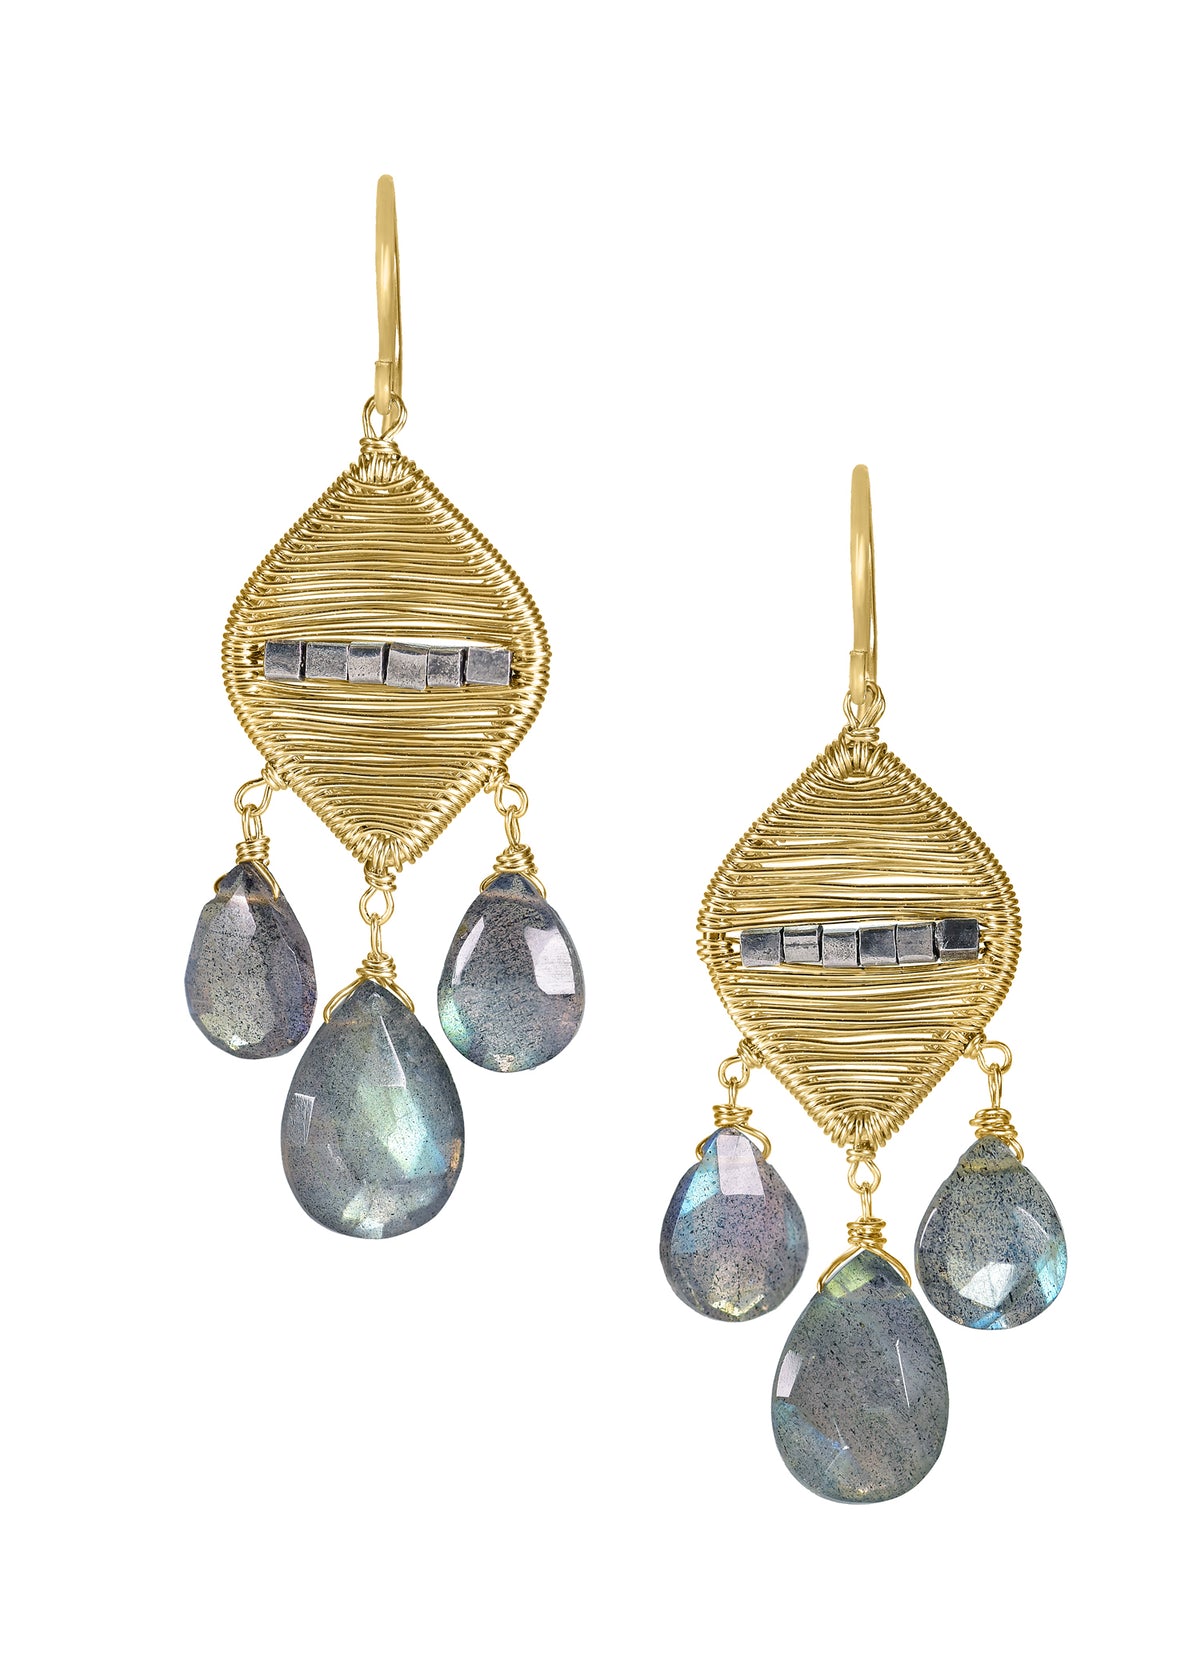 Labradorite 14k gold fill Sterling silver Mixed metal Earrings measure 1-3/4&quot; in length (including the ear wires) and 9/16&quot; in width at the widest point Handmade in our Los Angeles studio